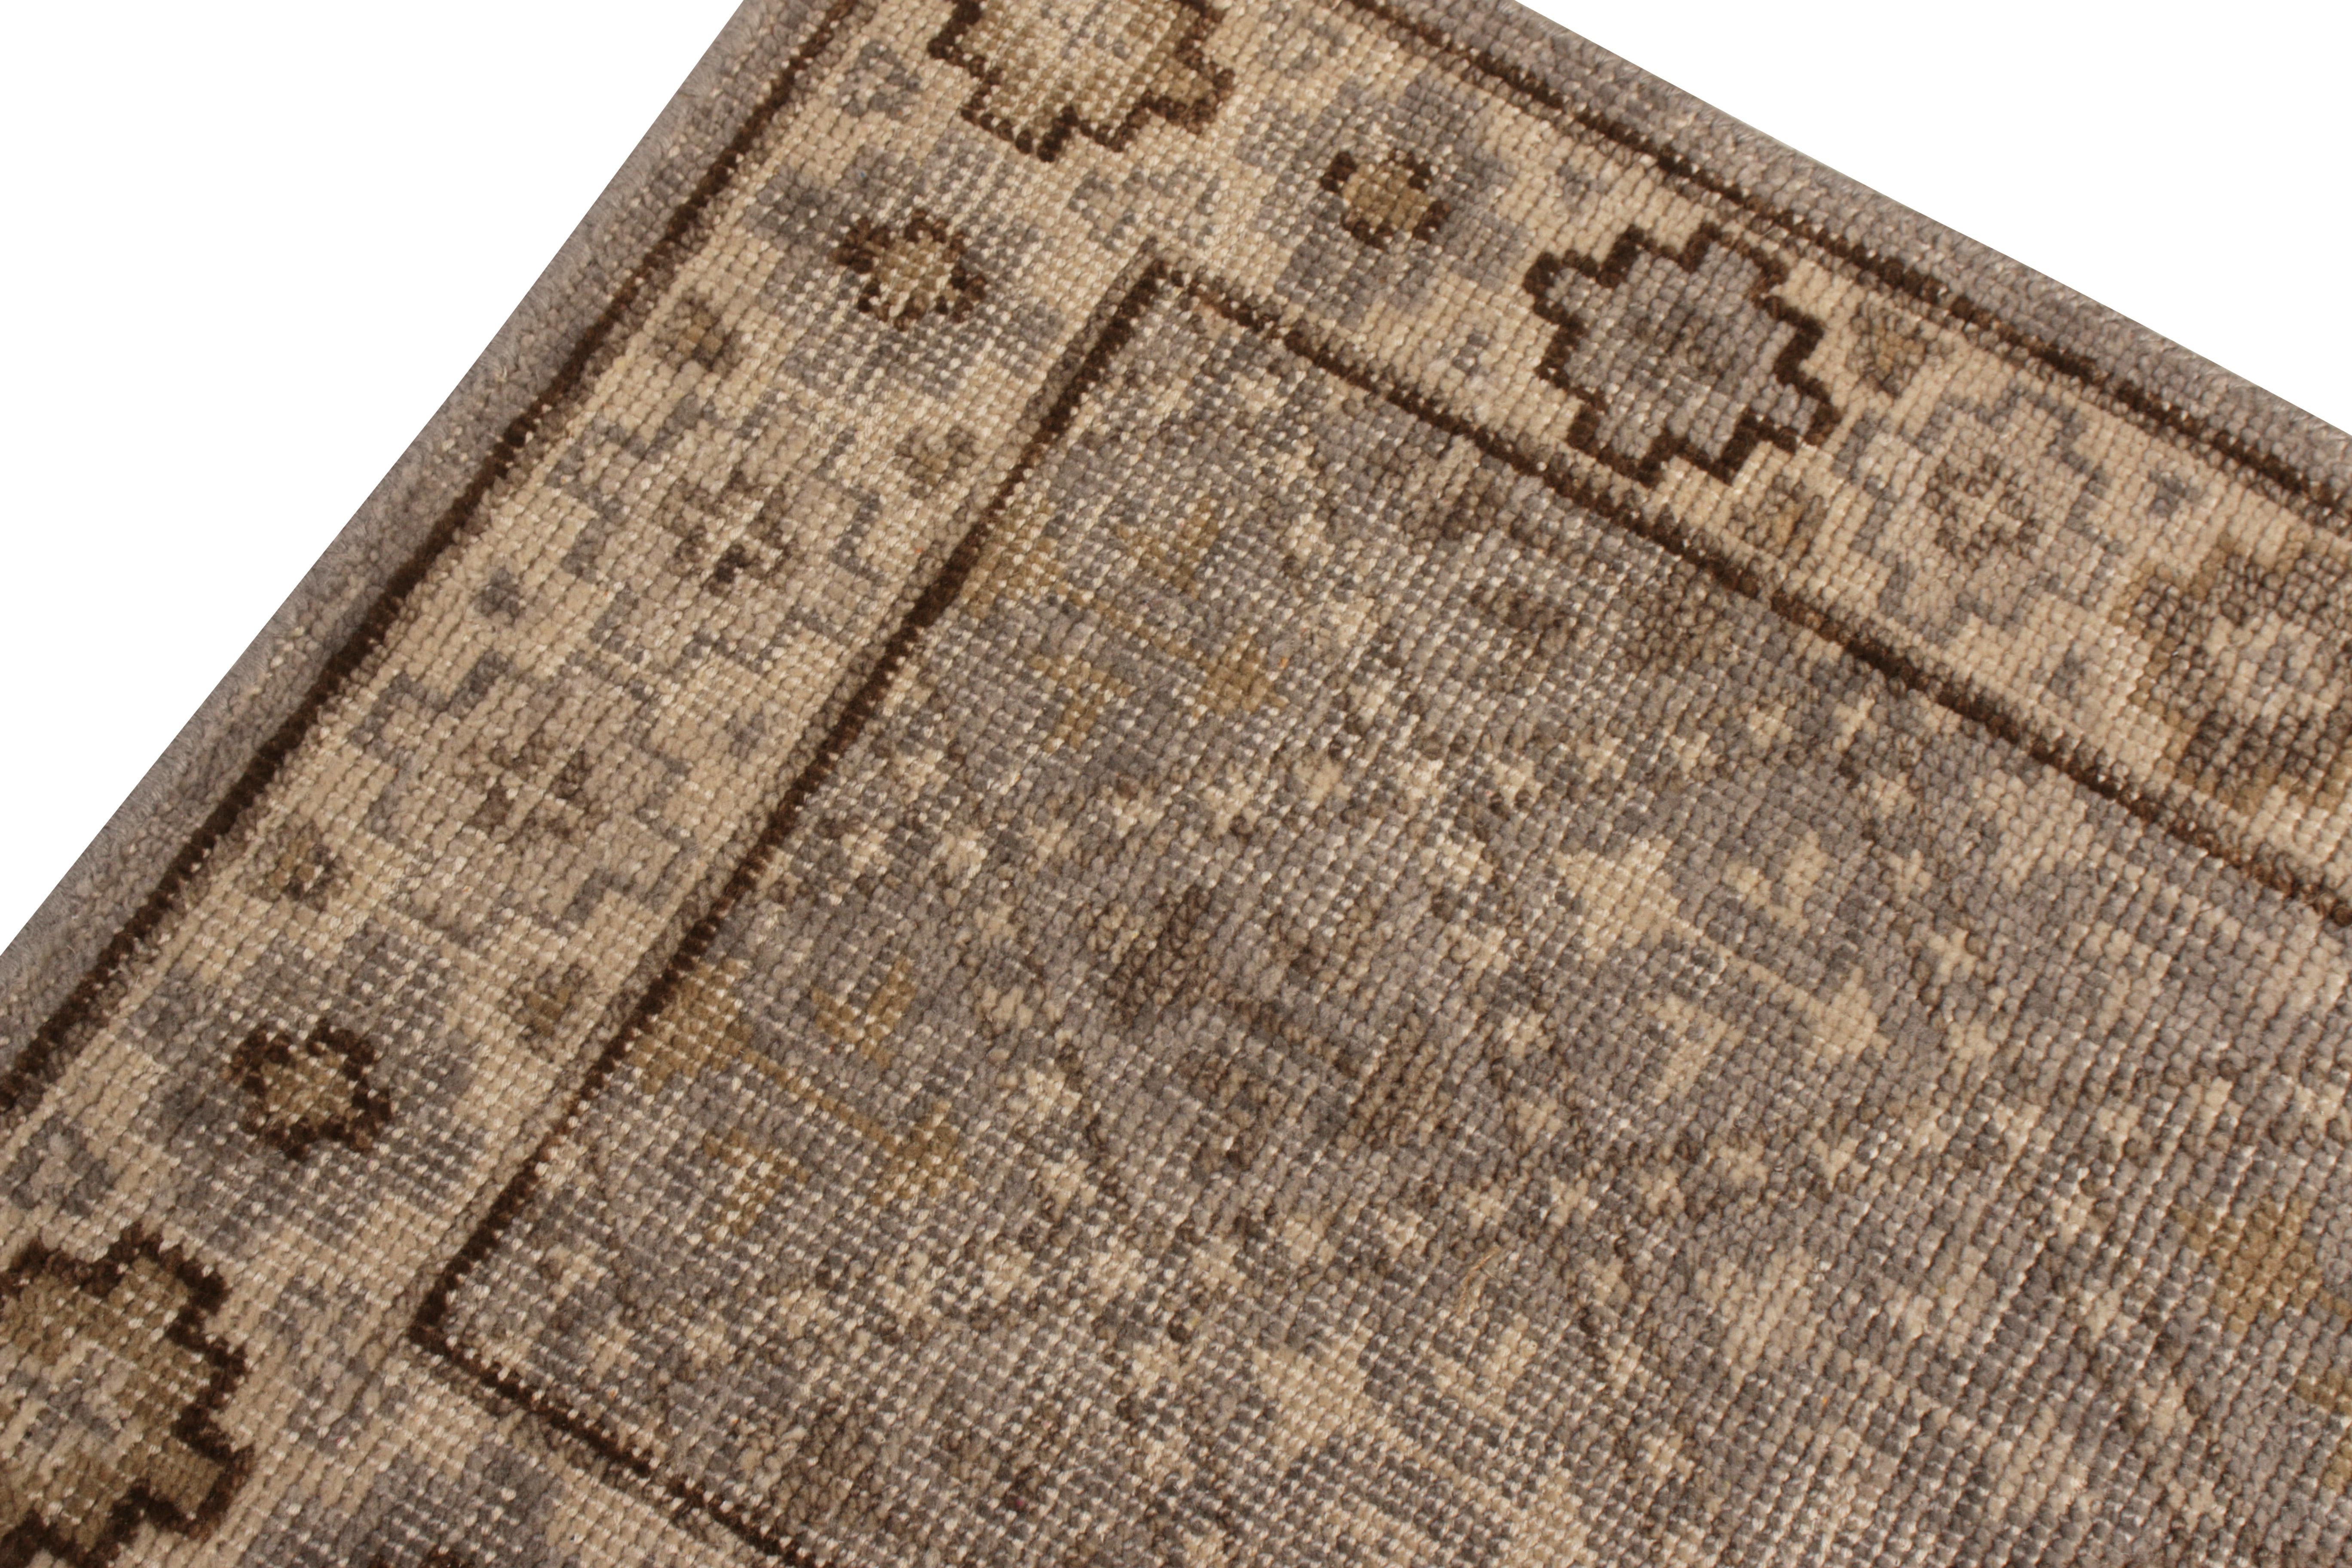 Handmade in a refined, low-pile wool with a comfortable wash achieving this shabby-chic distressed style, this gift sized 2x3 rug hails from the Homage Collection by Rug & Kilim; both well-suited for wall hanging, doormat, and varied entryway